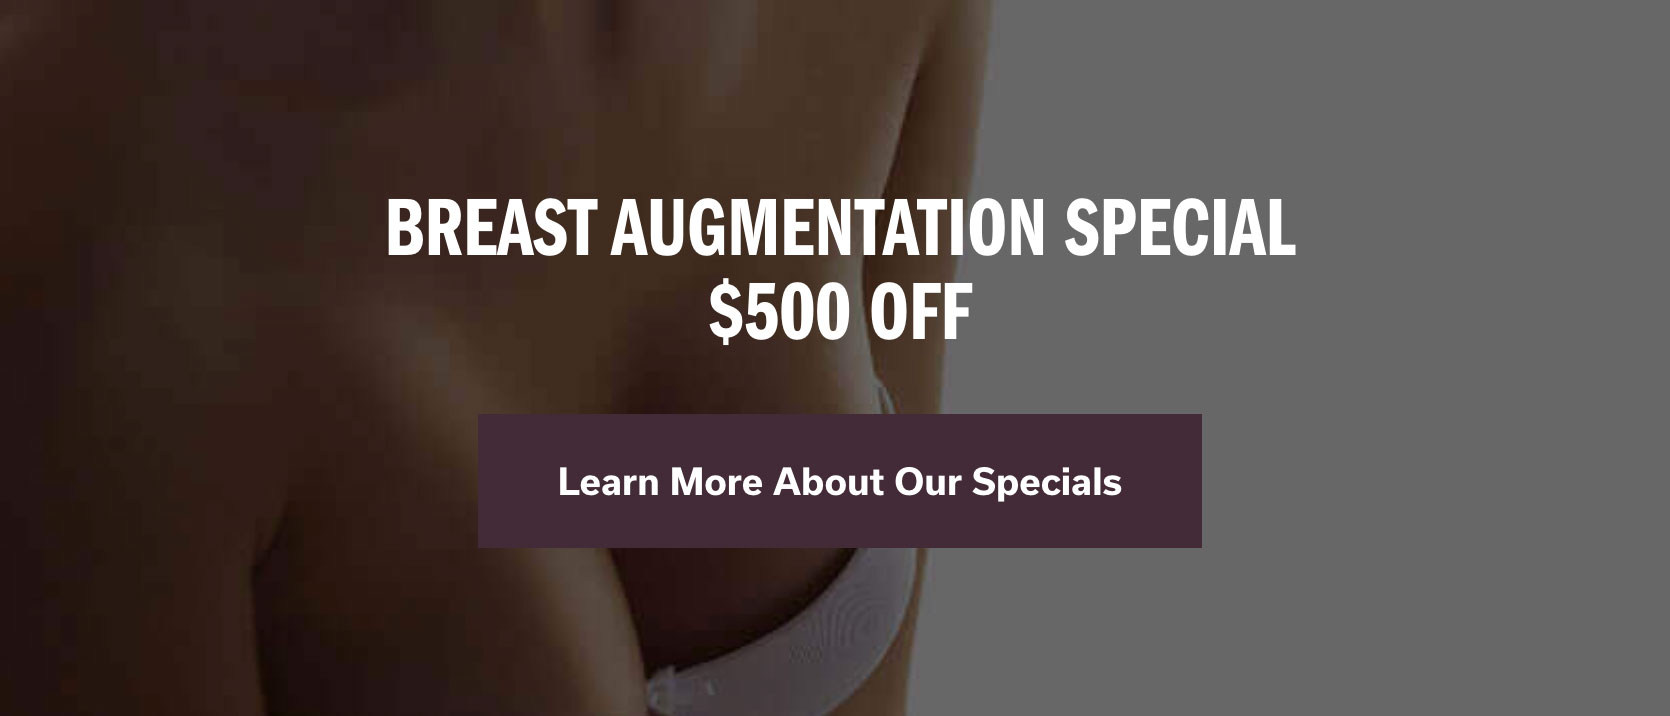 Breast Augmentation Special $500 off